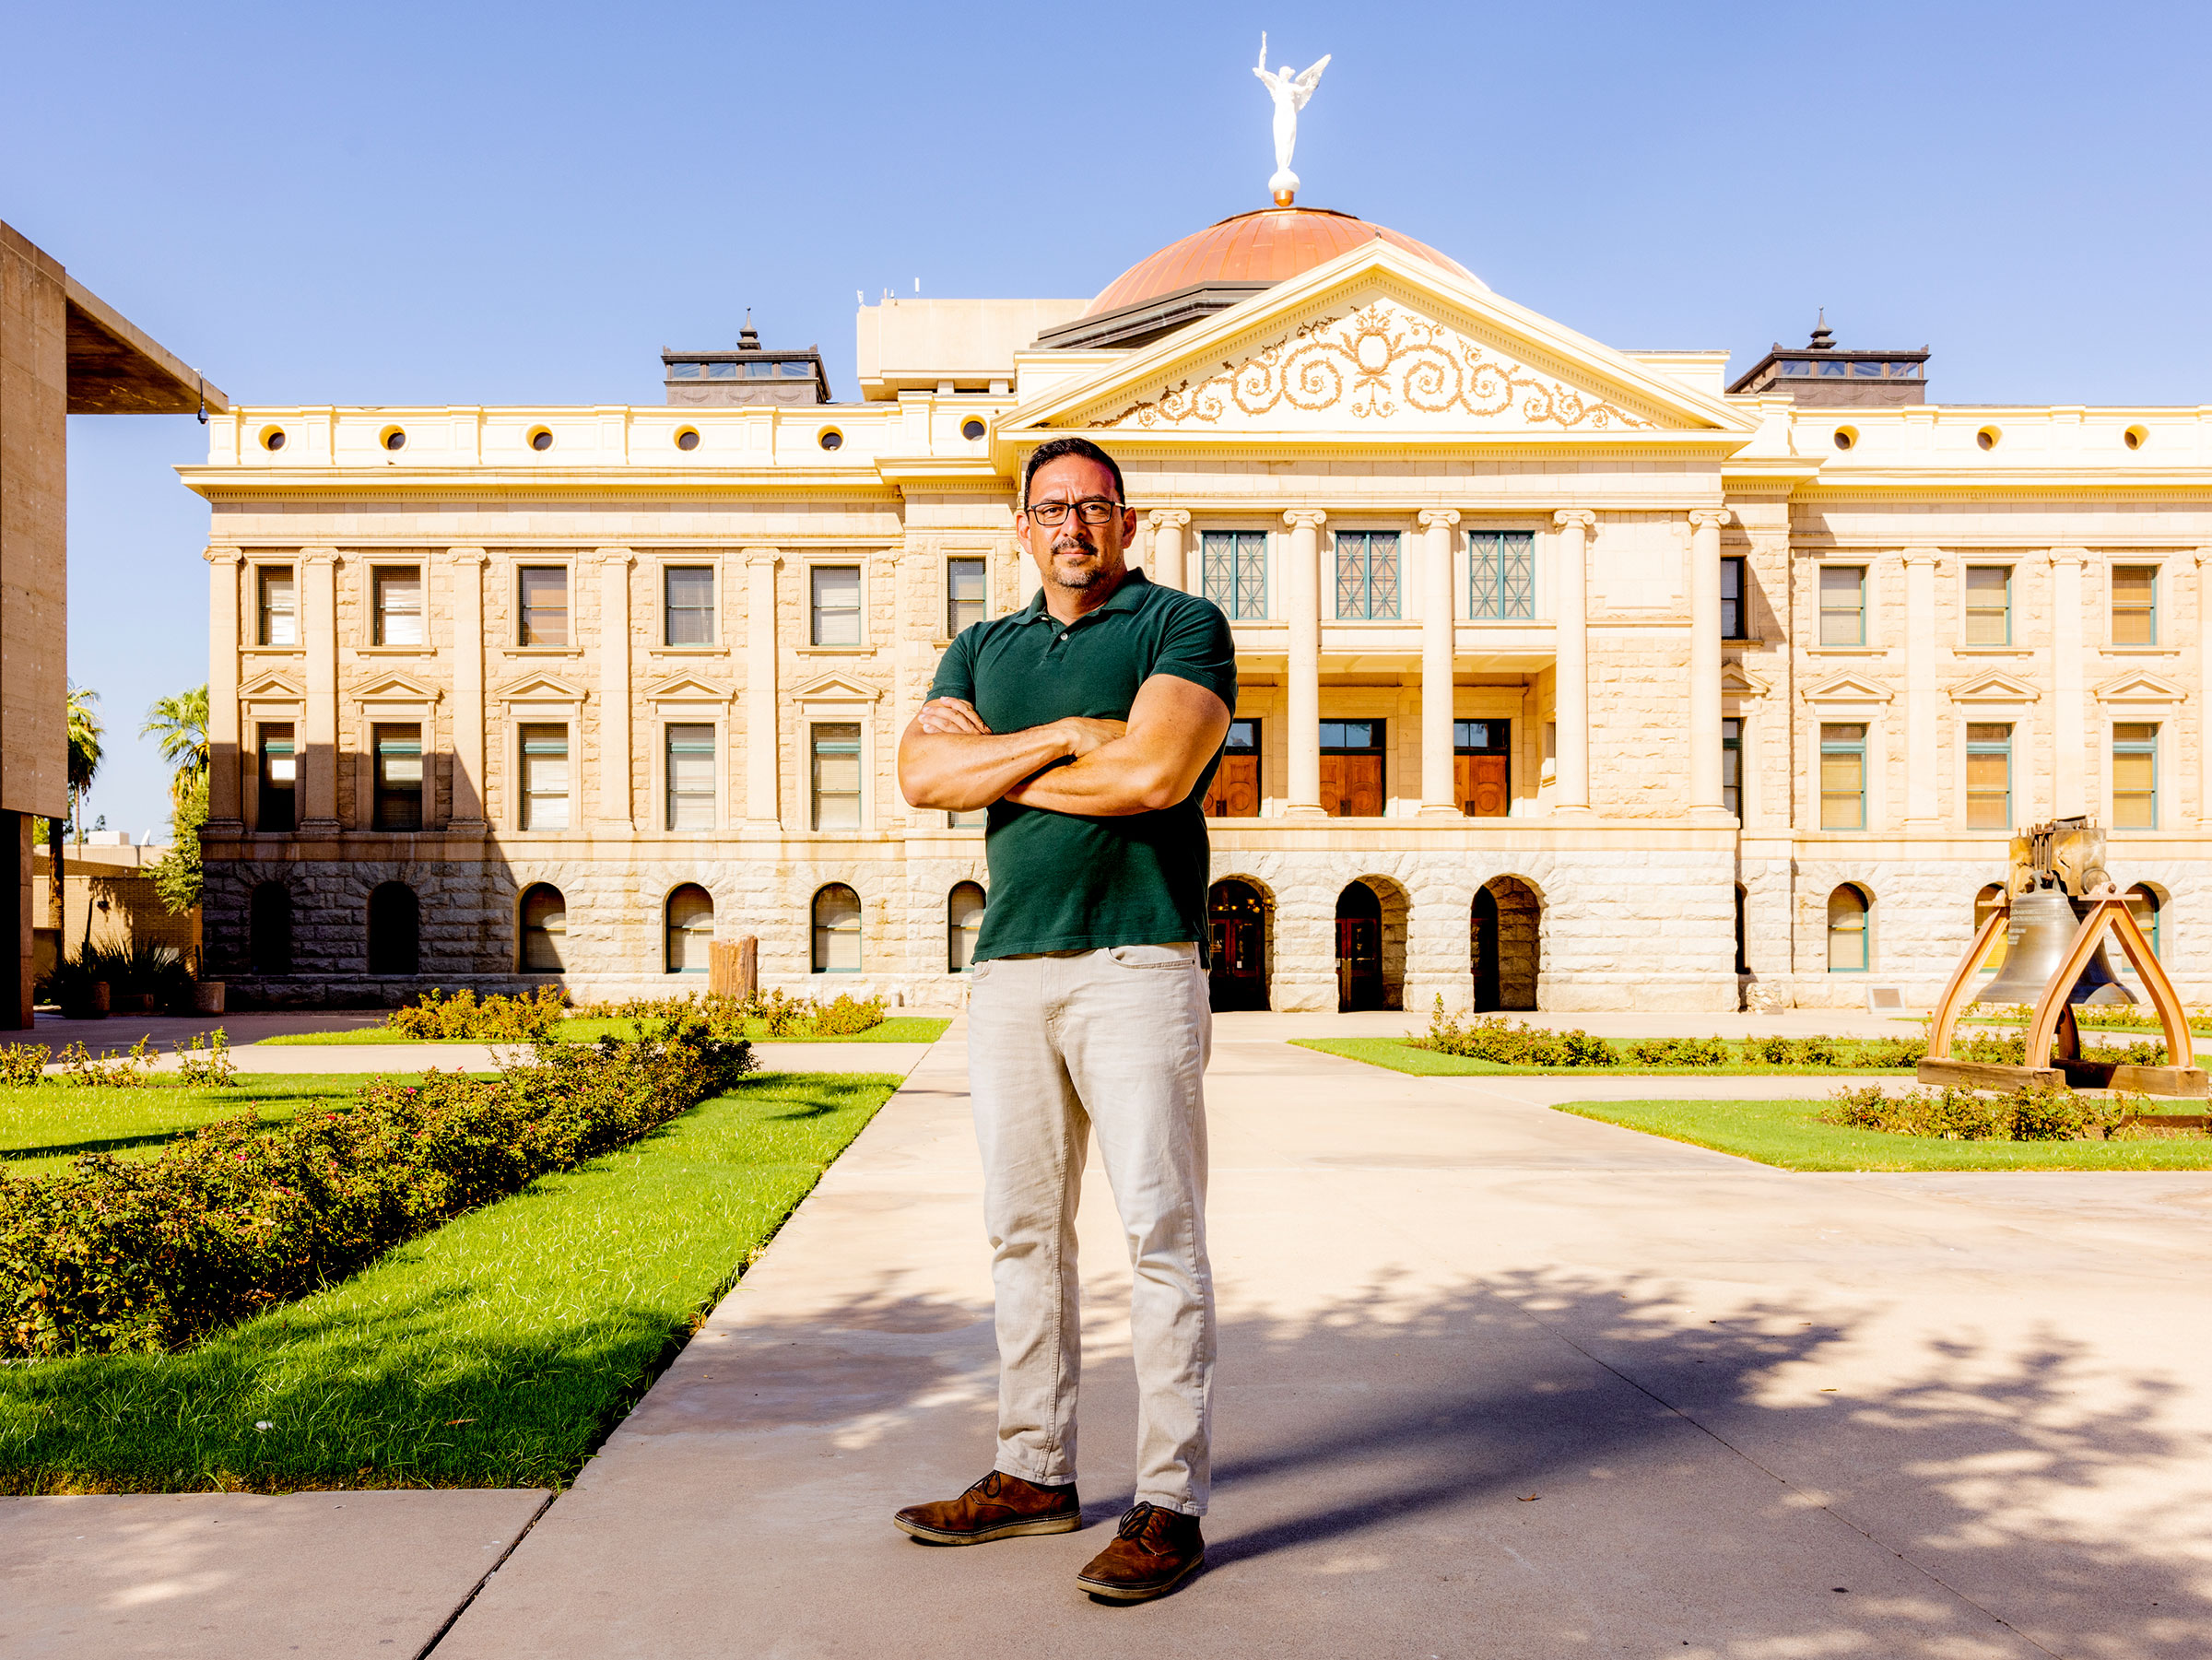 Fontes at the Arizona Capitol in Phoenix on Sept. 5 (Cassidy Araiza for TIME)